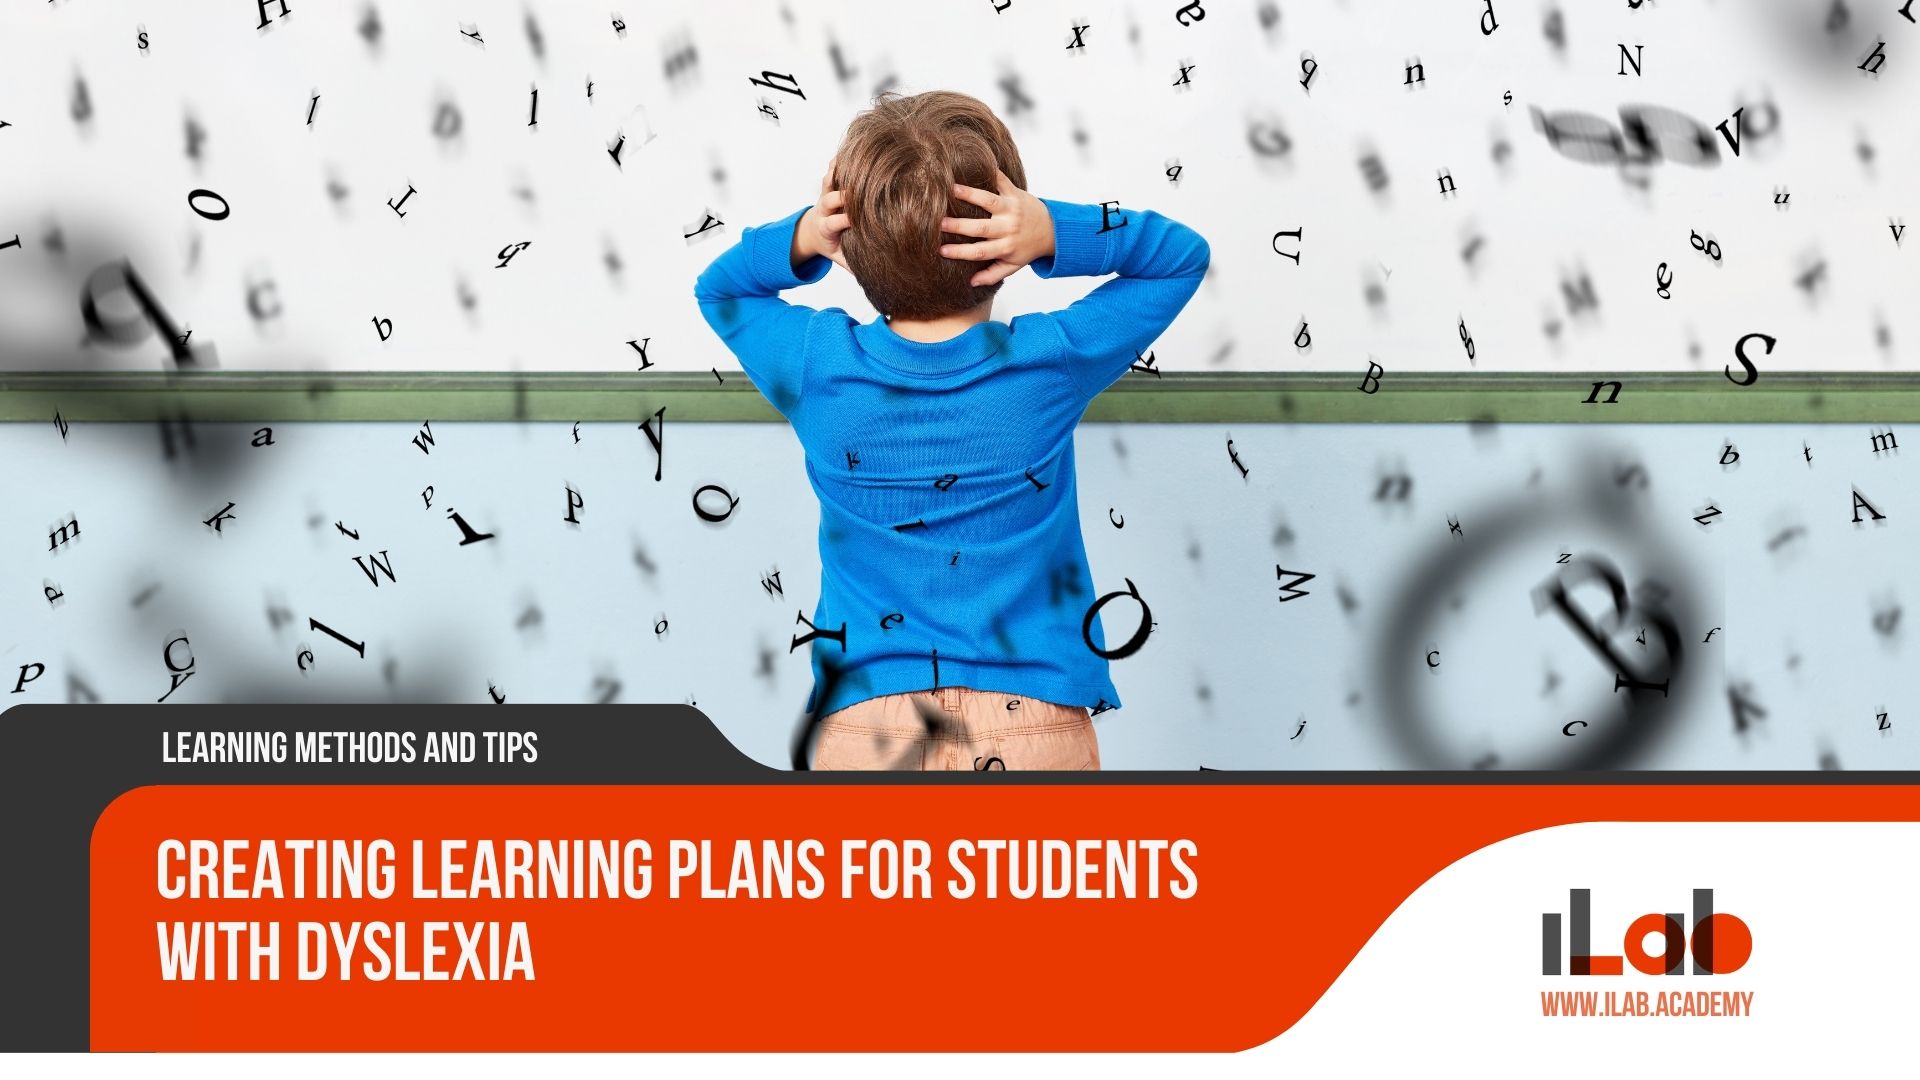 Creating Learning Plans for Students With Dyslexia